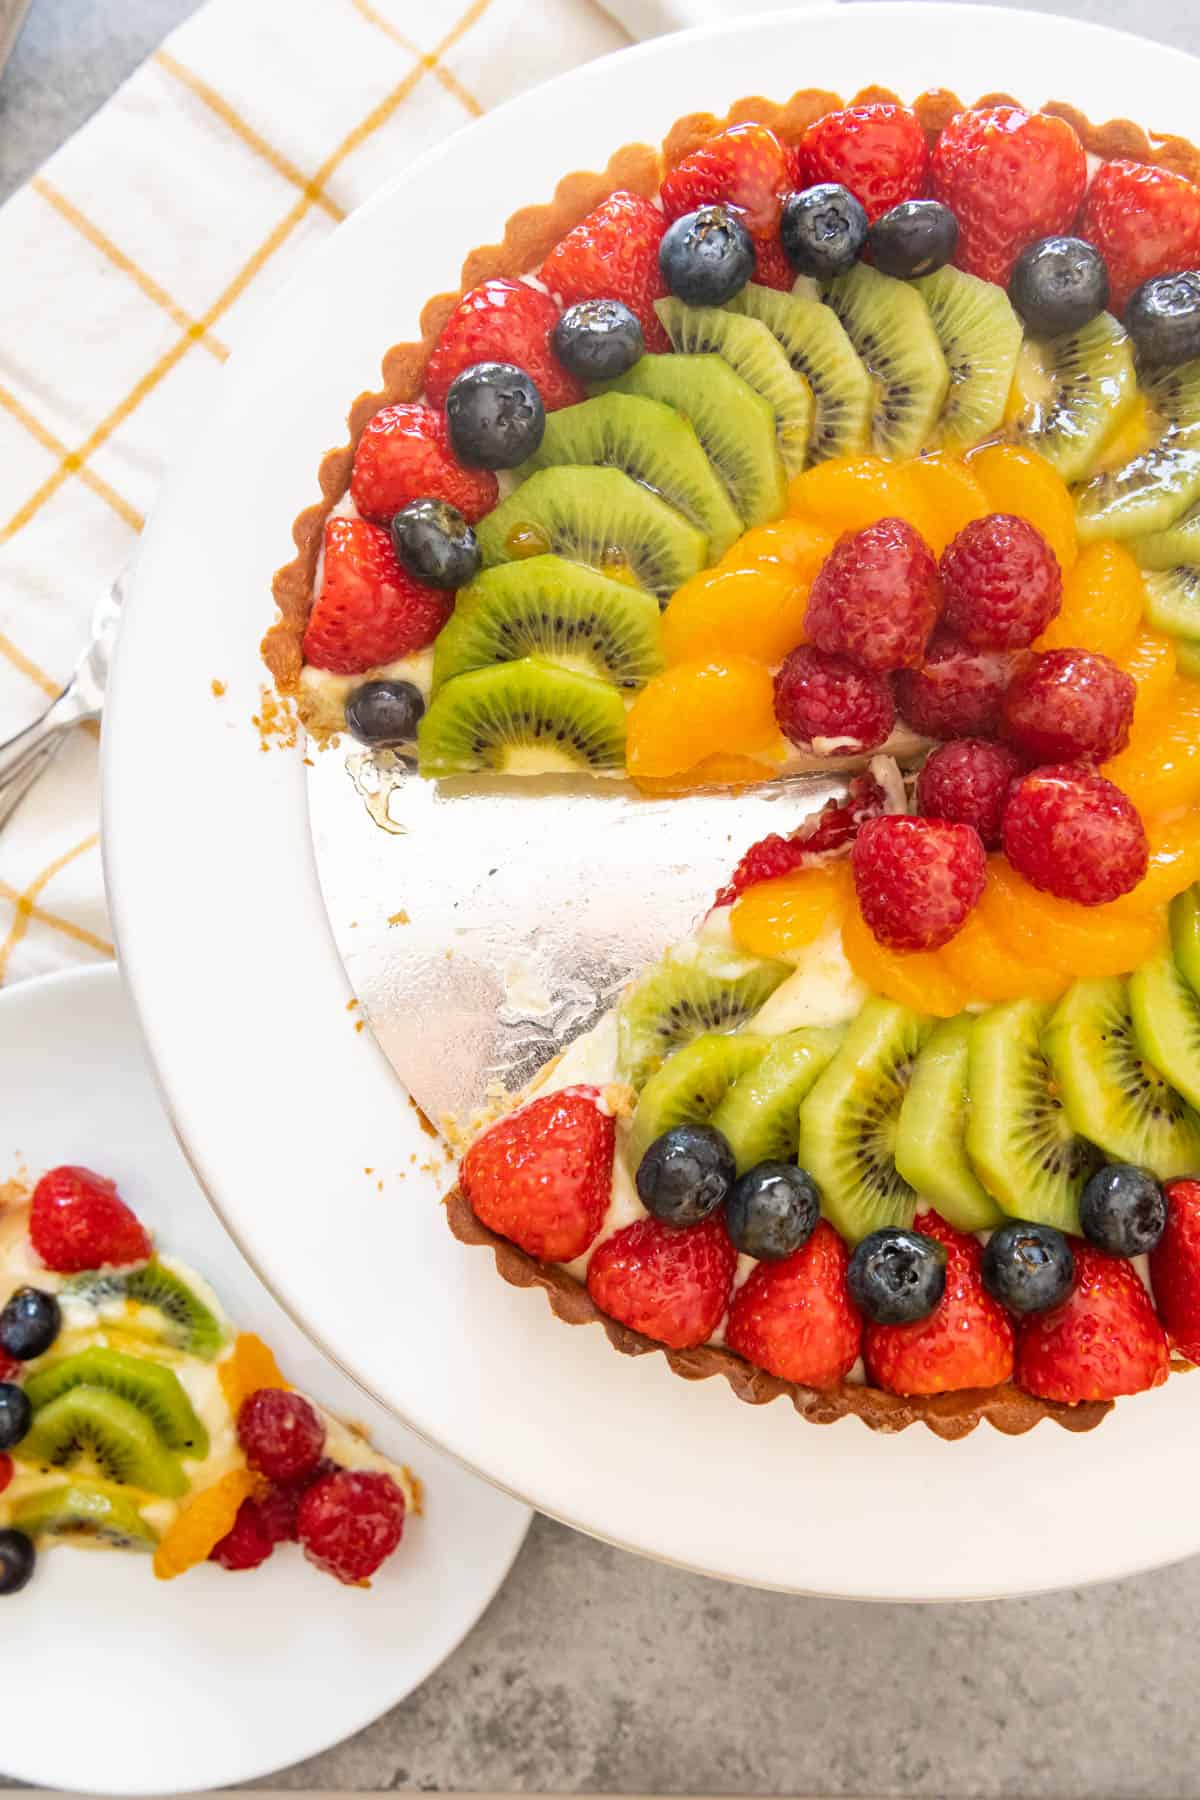 An image of a classic French fruit tart with strawberries, kiwi, mandarin oranges, blueberries and raspberries arranged on top.